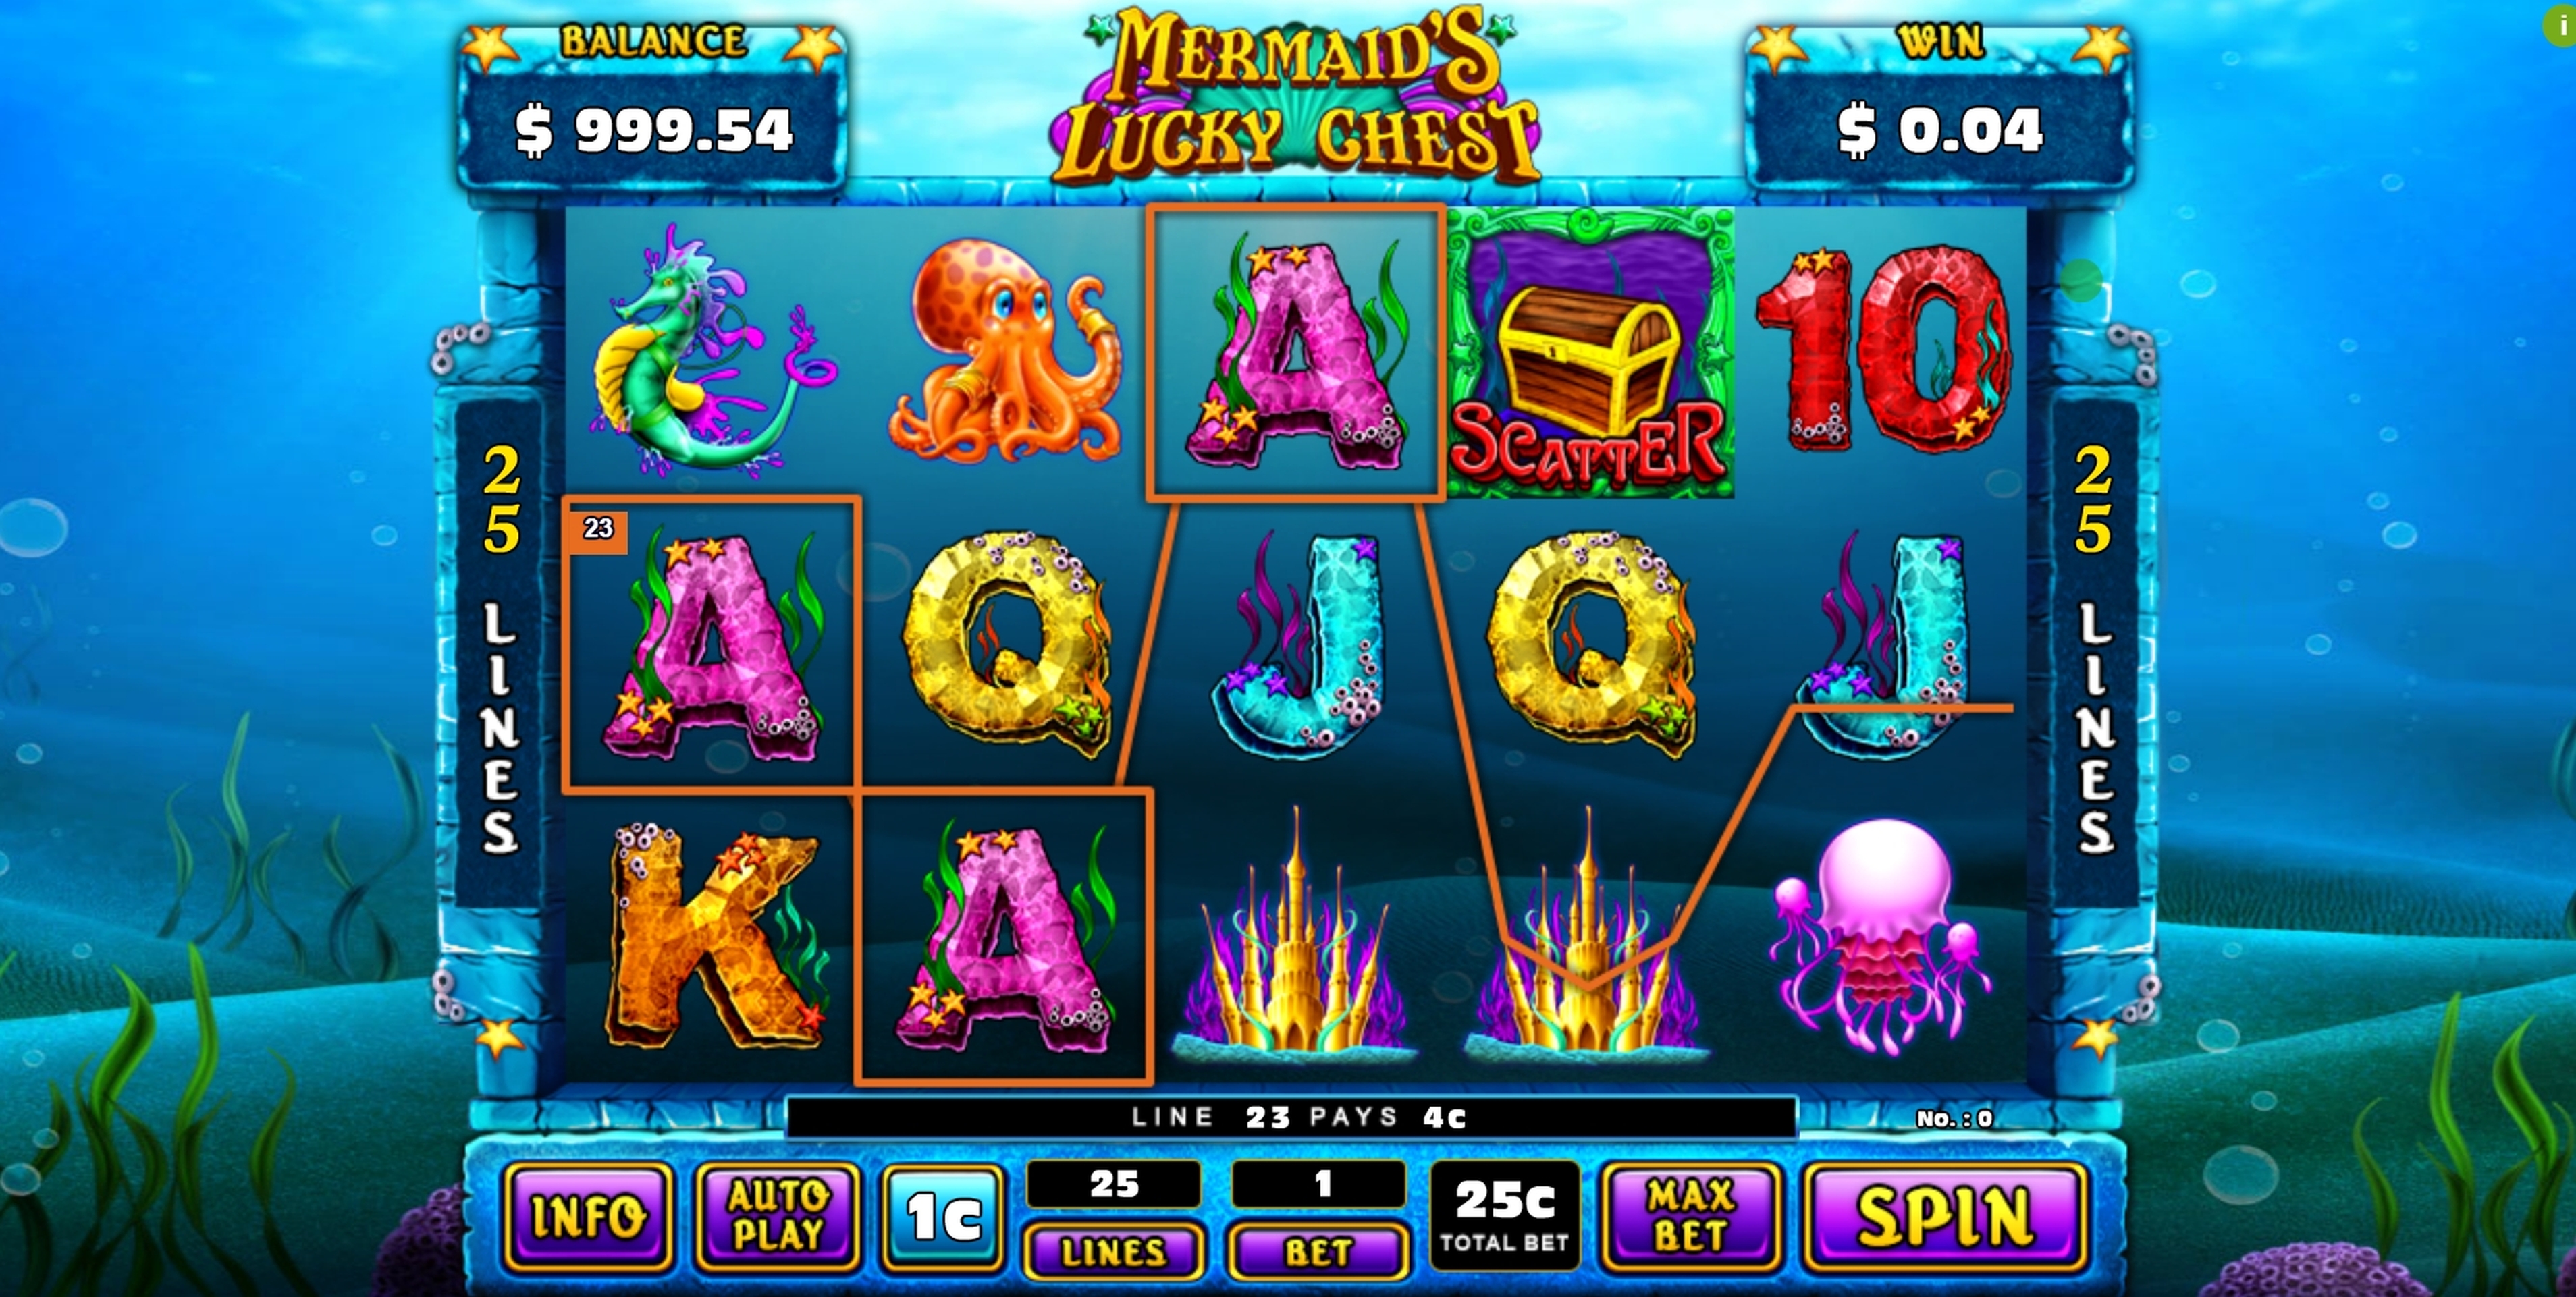 Win Money in Mermaid's Lucky Chest Free Slot Game by GMW